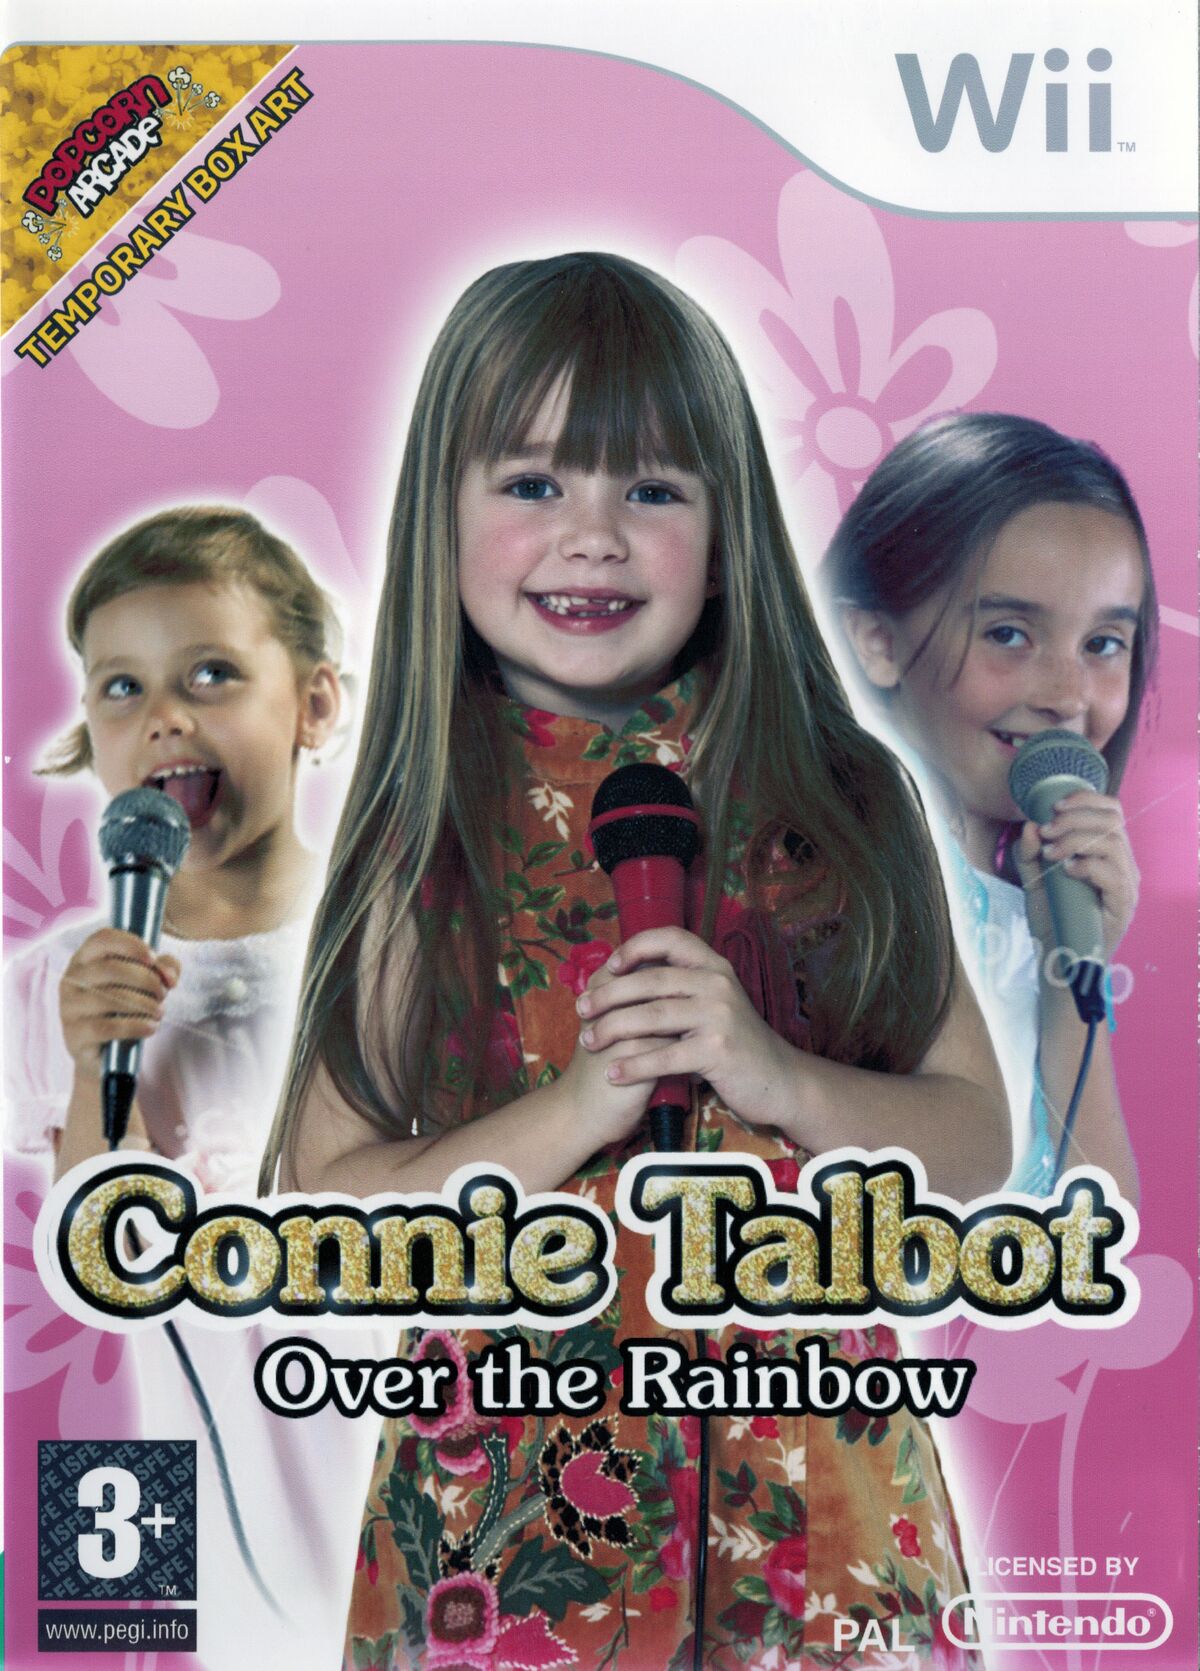 Connie Talbot: Over the Rainbow (found build of cancelled Wii